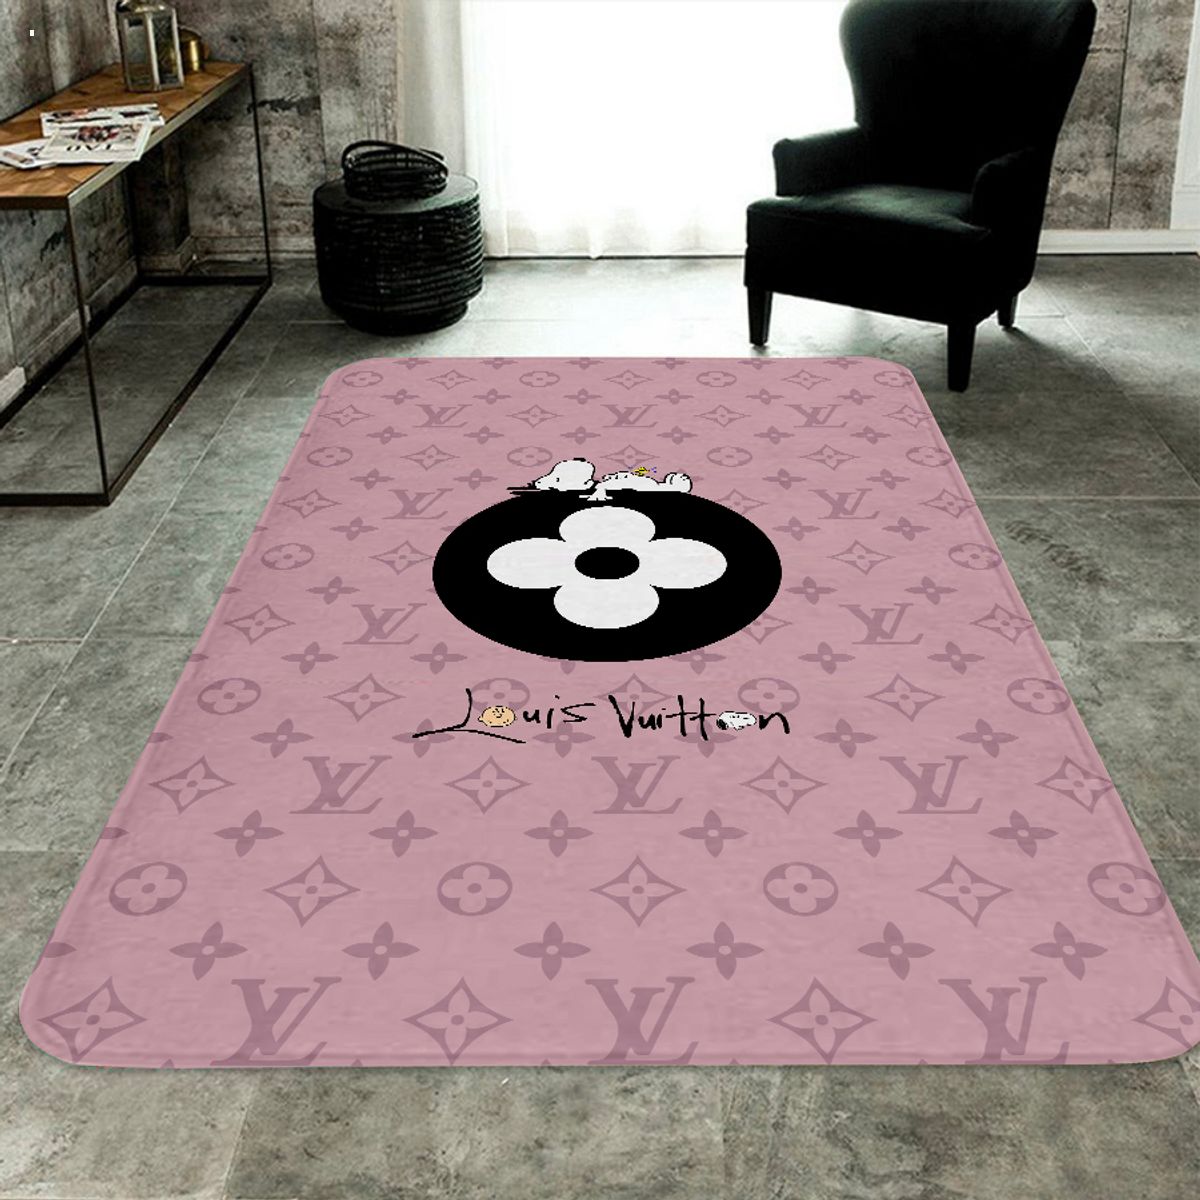 Best Price] Louis Vuitton Feat Supreme Arena Rug - Luxury & Sports Store